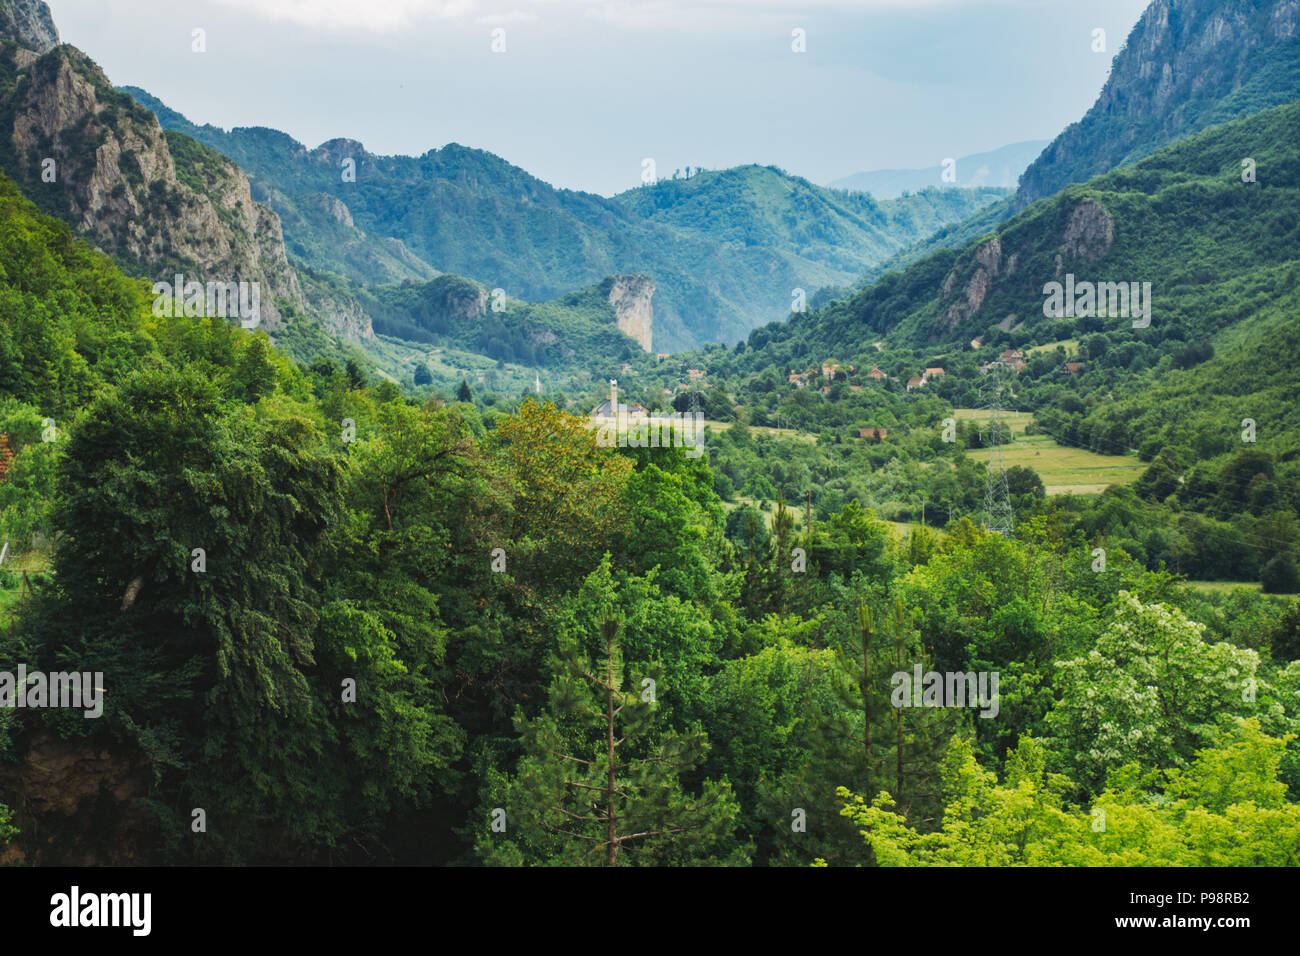 The lush forests and mountains of Blidinje Nature Park, seen from the  Doljani valley, in Bosnia and Herzegovina Stock Photo - Alamy